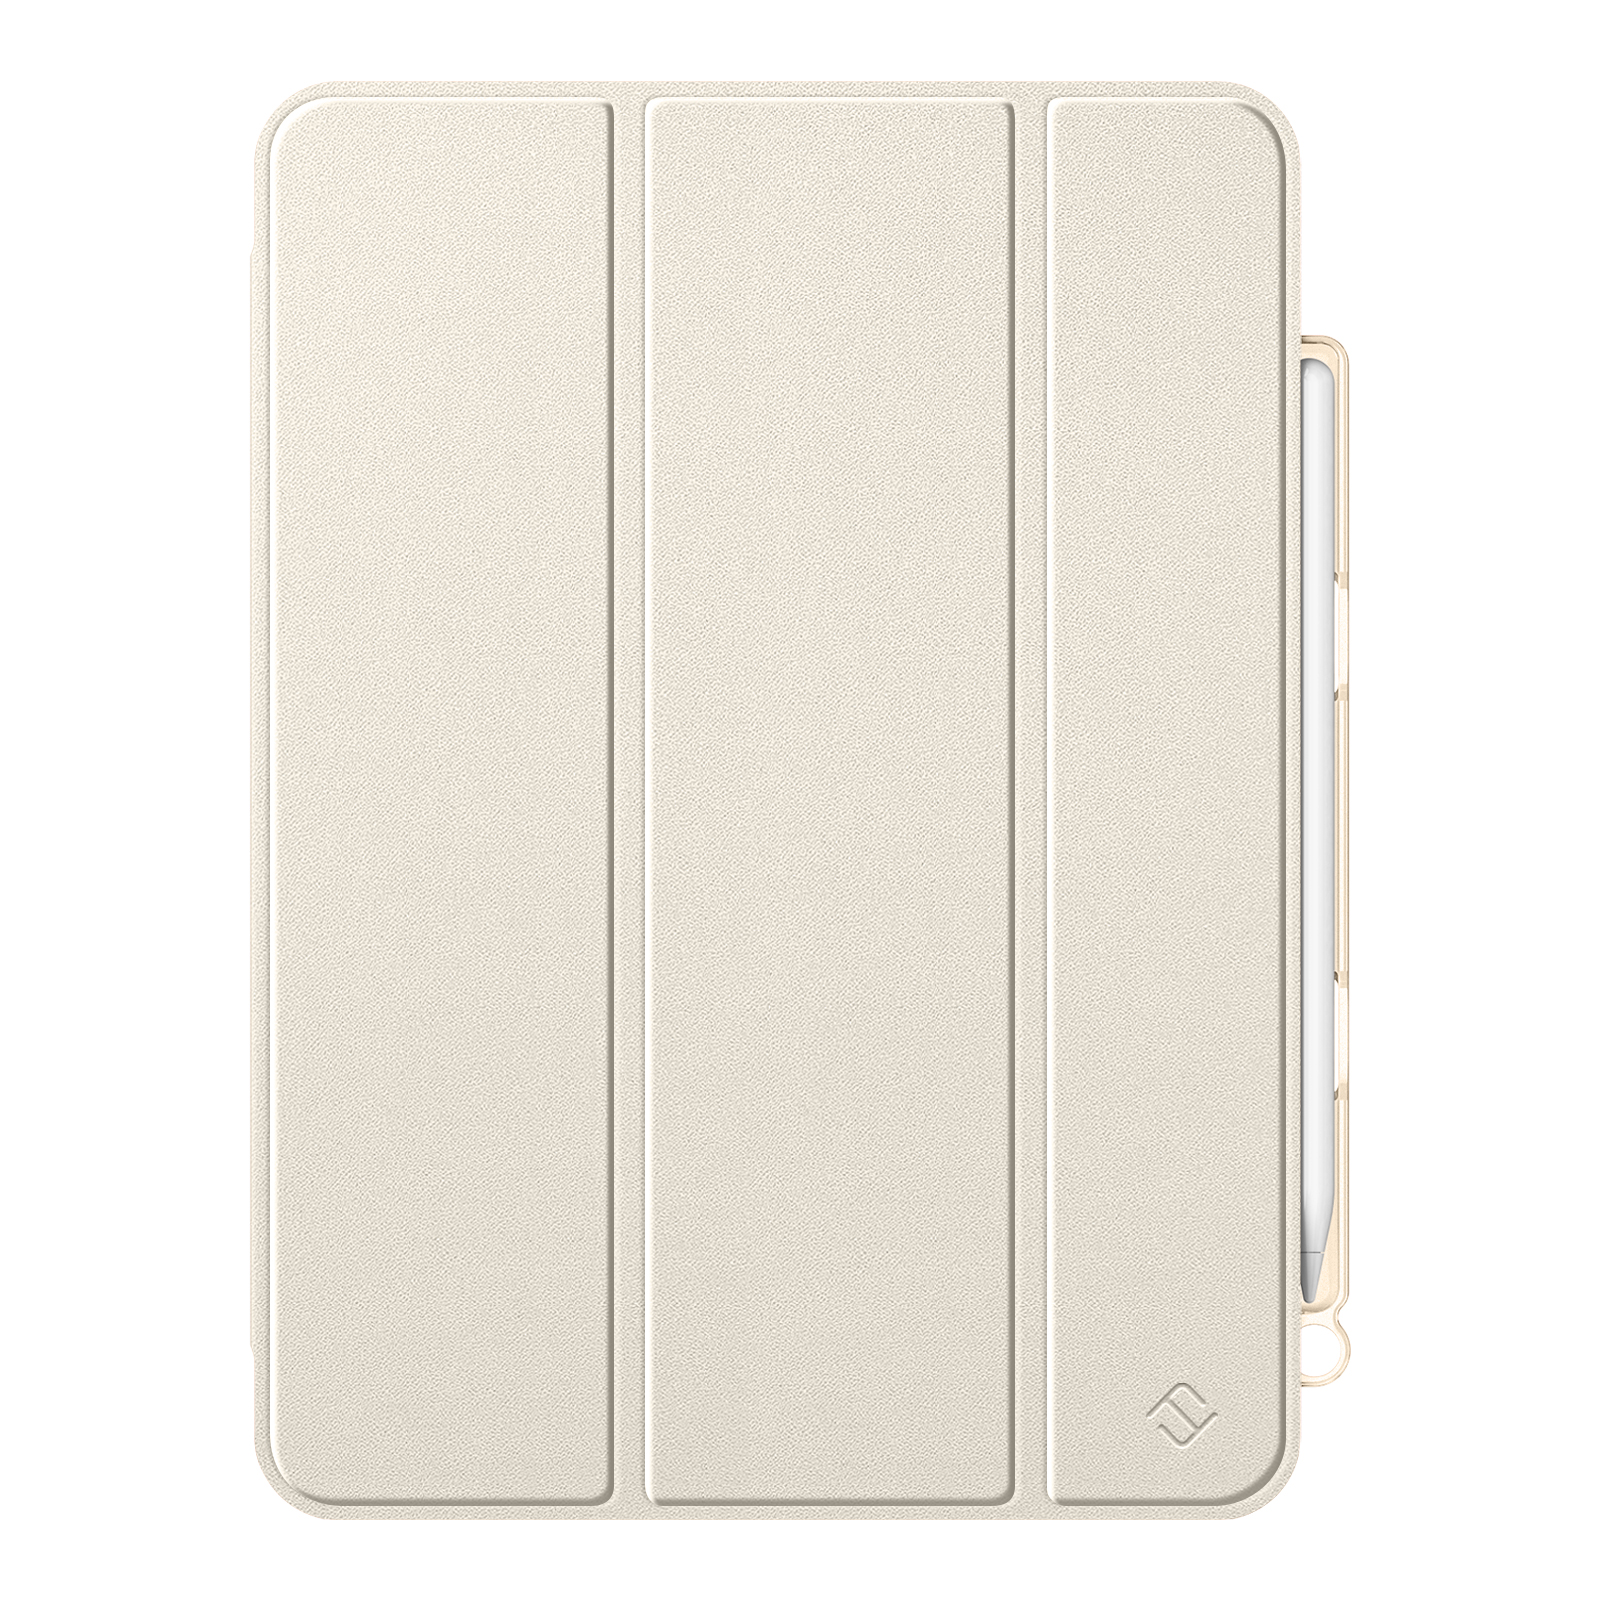 Bookcover, / 4. iPad 2020, iPad 5. Generation Air Apple, Generation 2022 Hülle, Champagner Air FINTIE